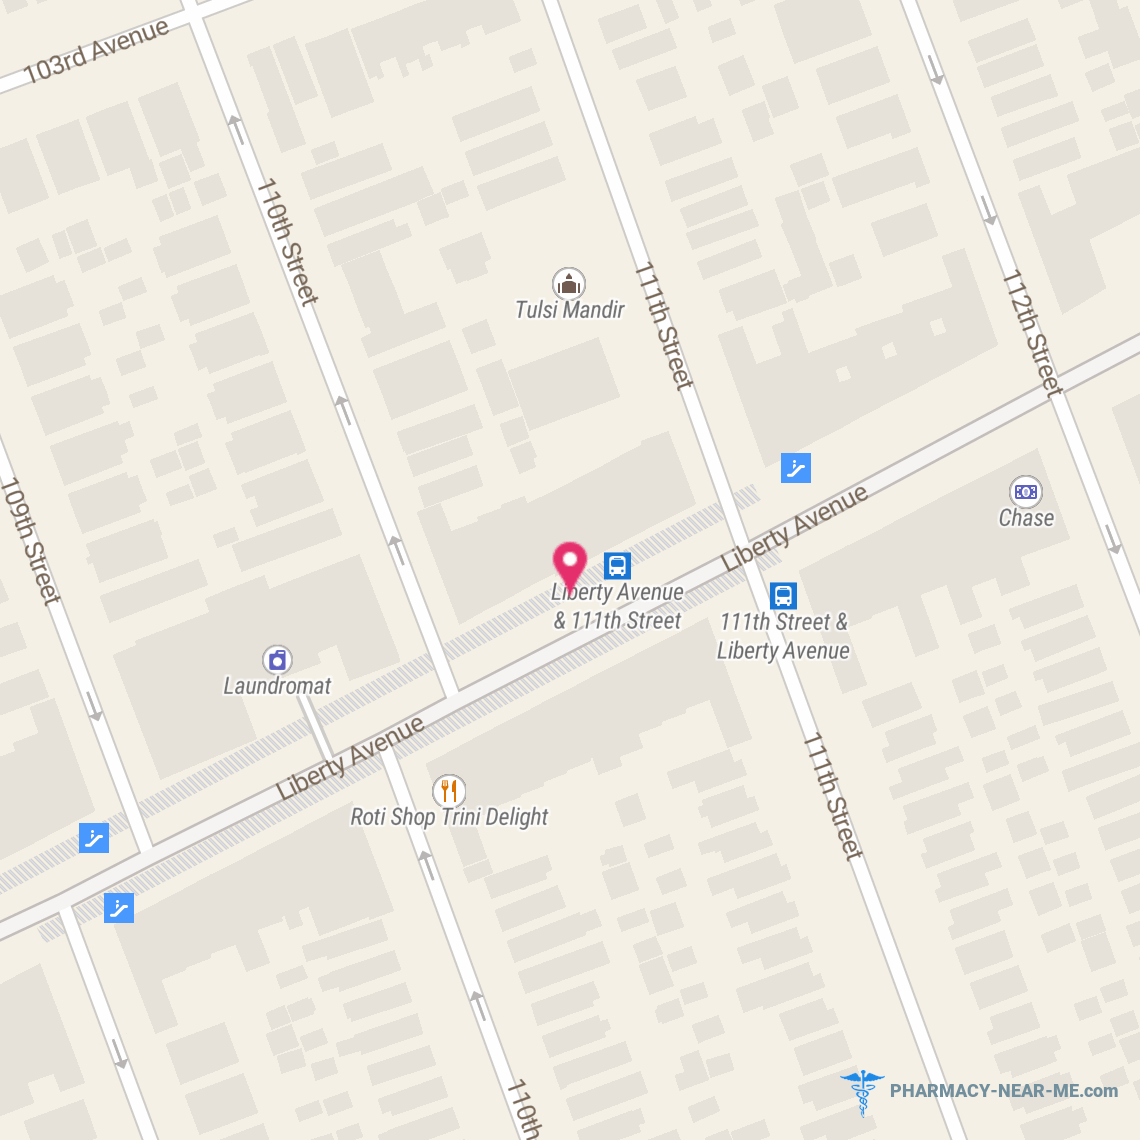 CPW PHARMACY - Pharmacy Hours, Phone, Reviews & Information: 121-16 Liberty Avenue, Queens, New York 11419, United States